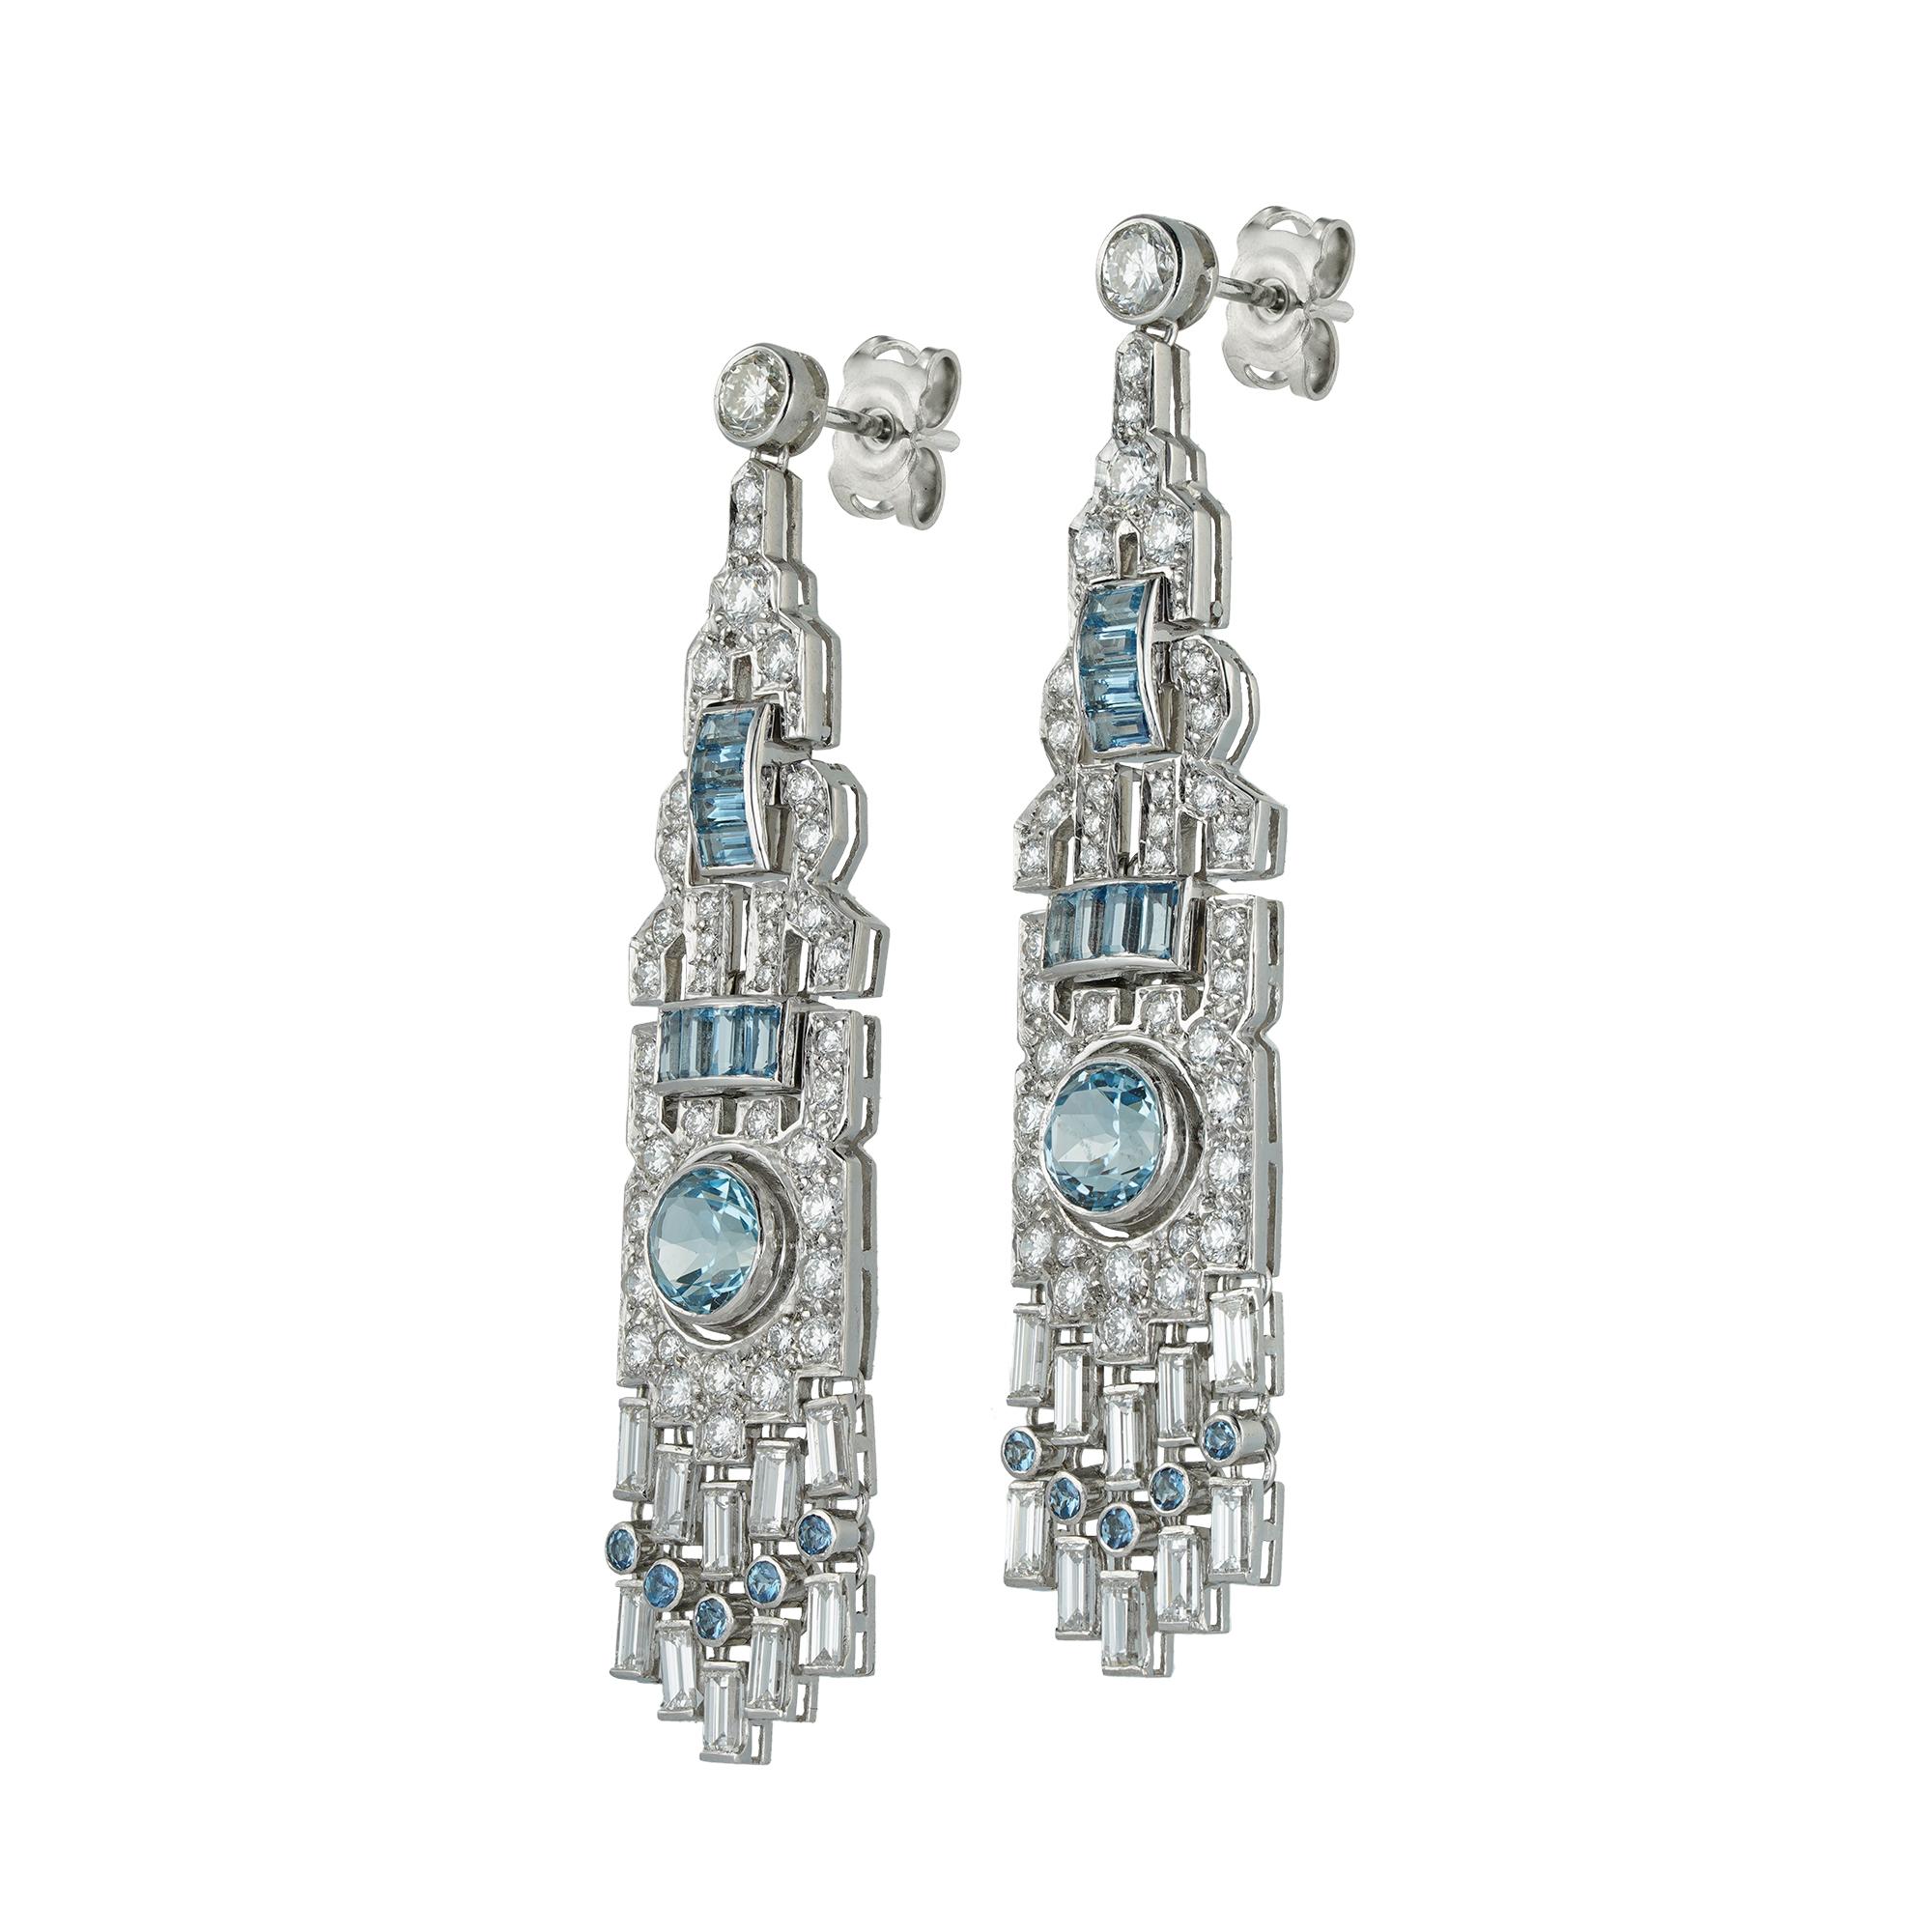 A pair of aquamarine and diamond drop earrings, each earring set with a round faceted aquamarine centre, weighing a total of 1.40 carats in total, to a round brilliant-cut diamond and baguette-cut aquamarine-set geometric openwork drop surround, to